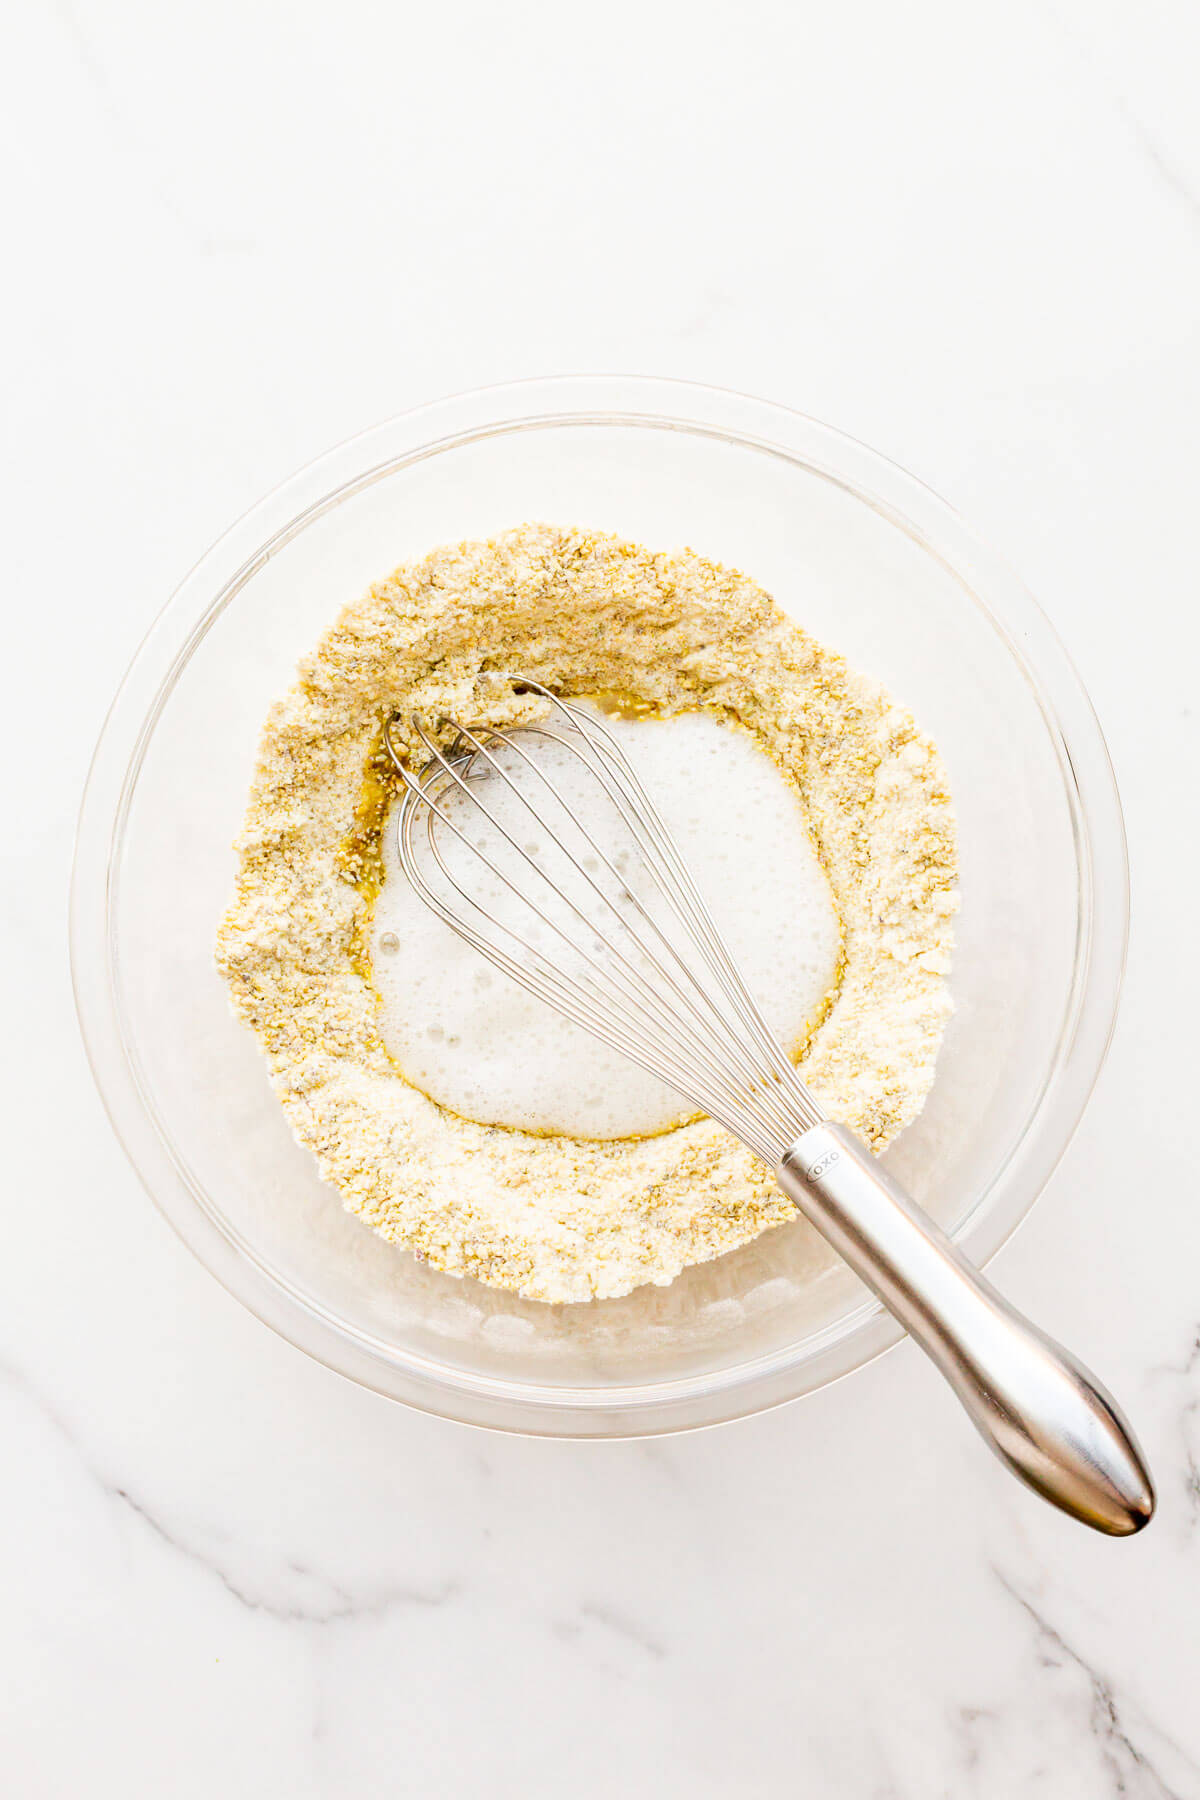 Whisking foamy egg whites into the dry mixture in a bowl to make pistachio financier cake batter.